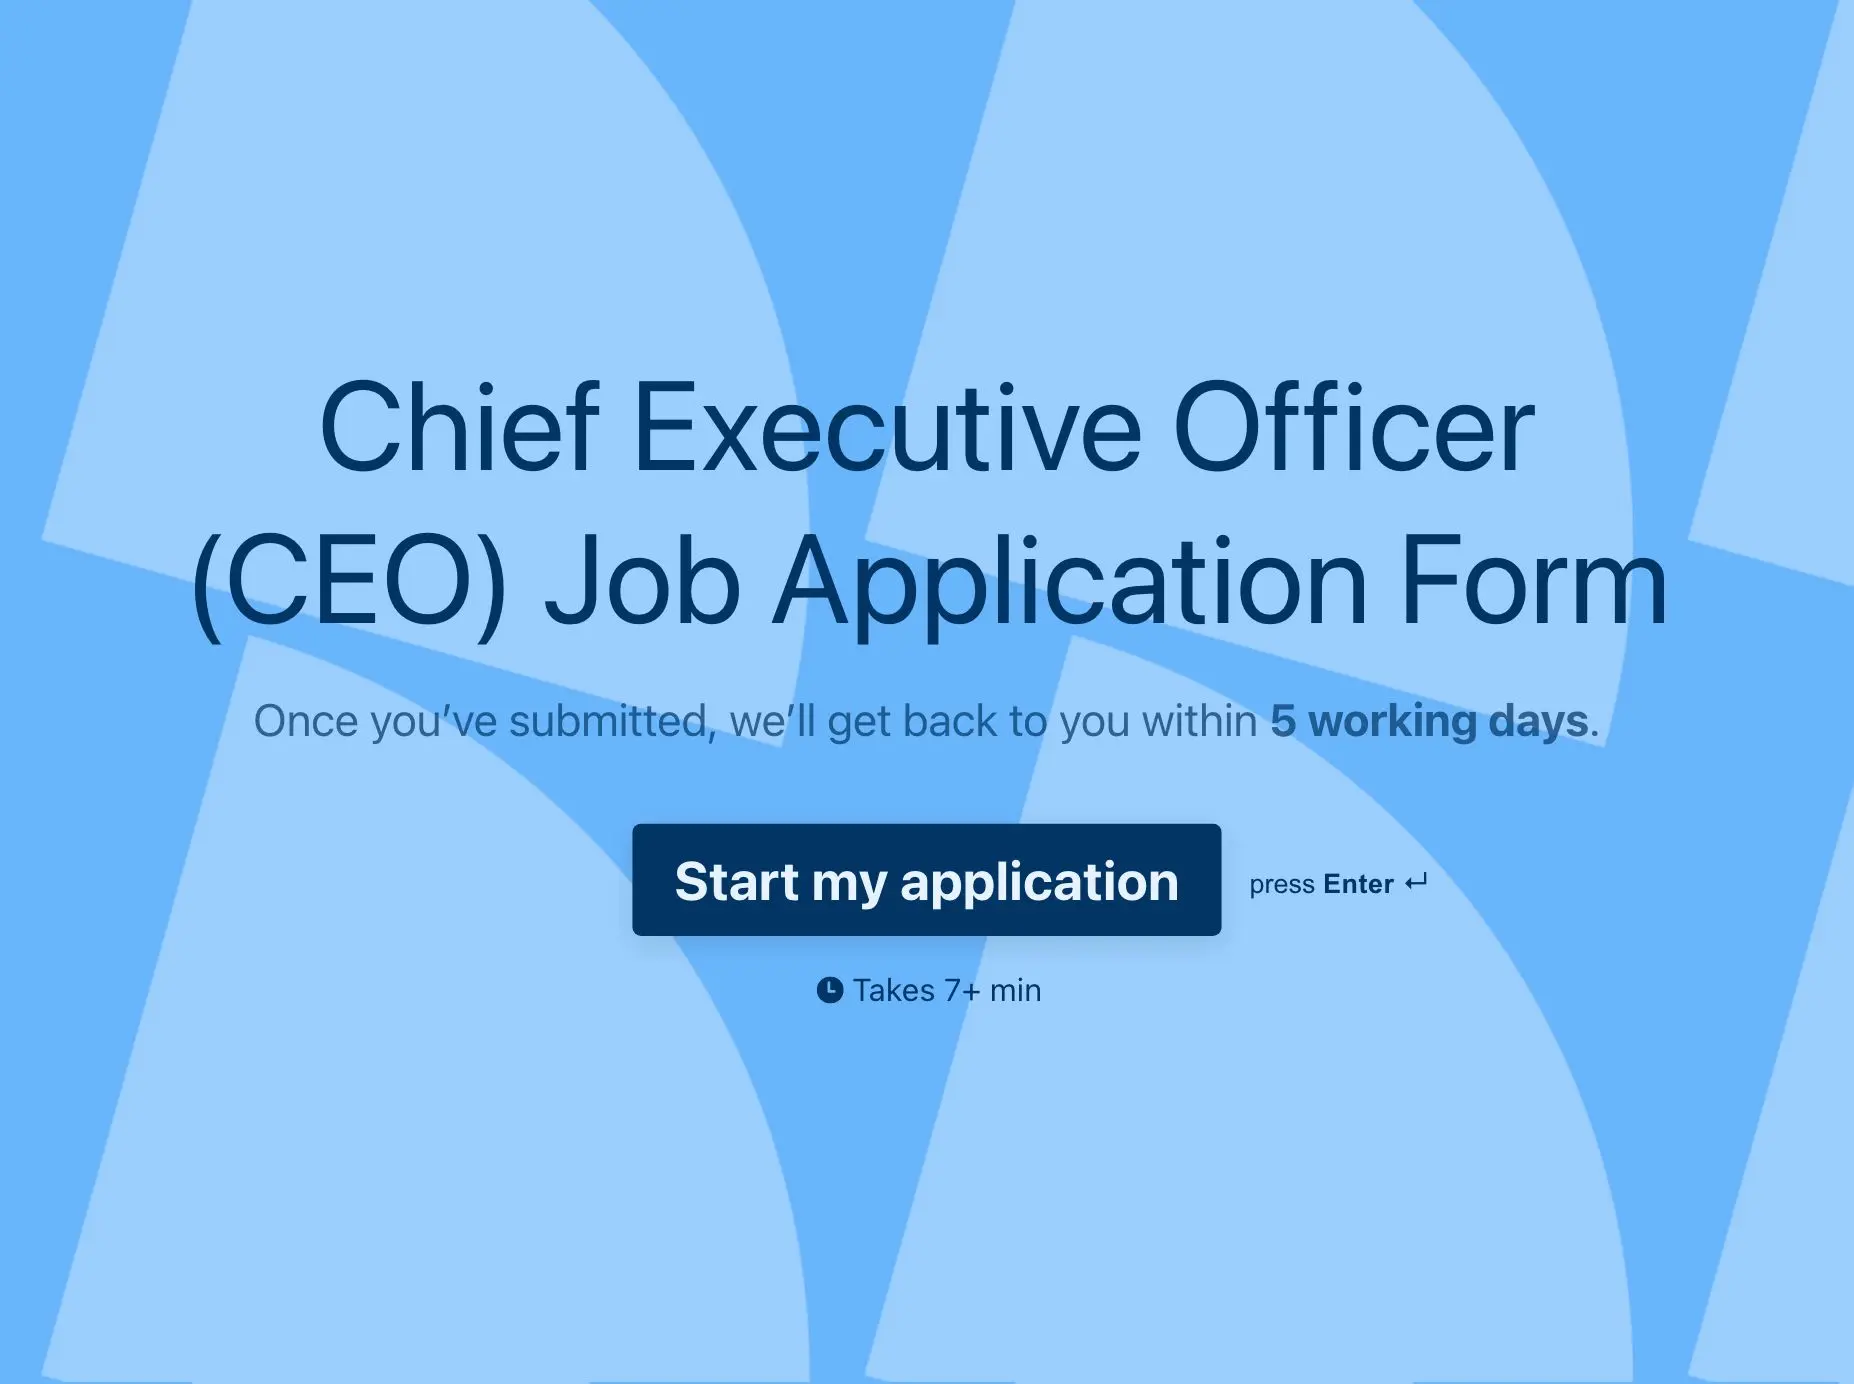 Chief Executive Officer (CEO) Job Application Form Template Hero